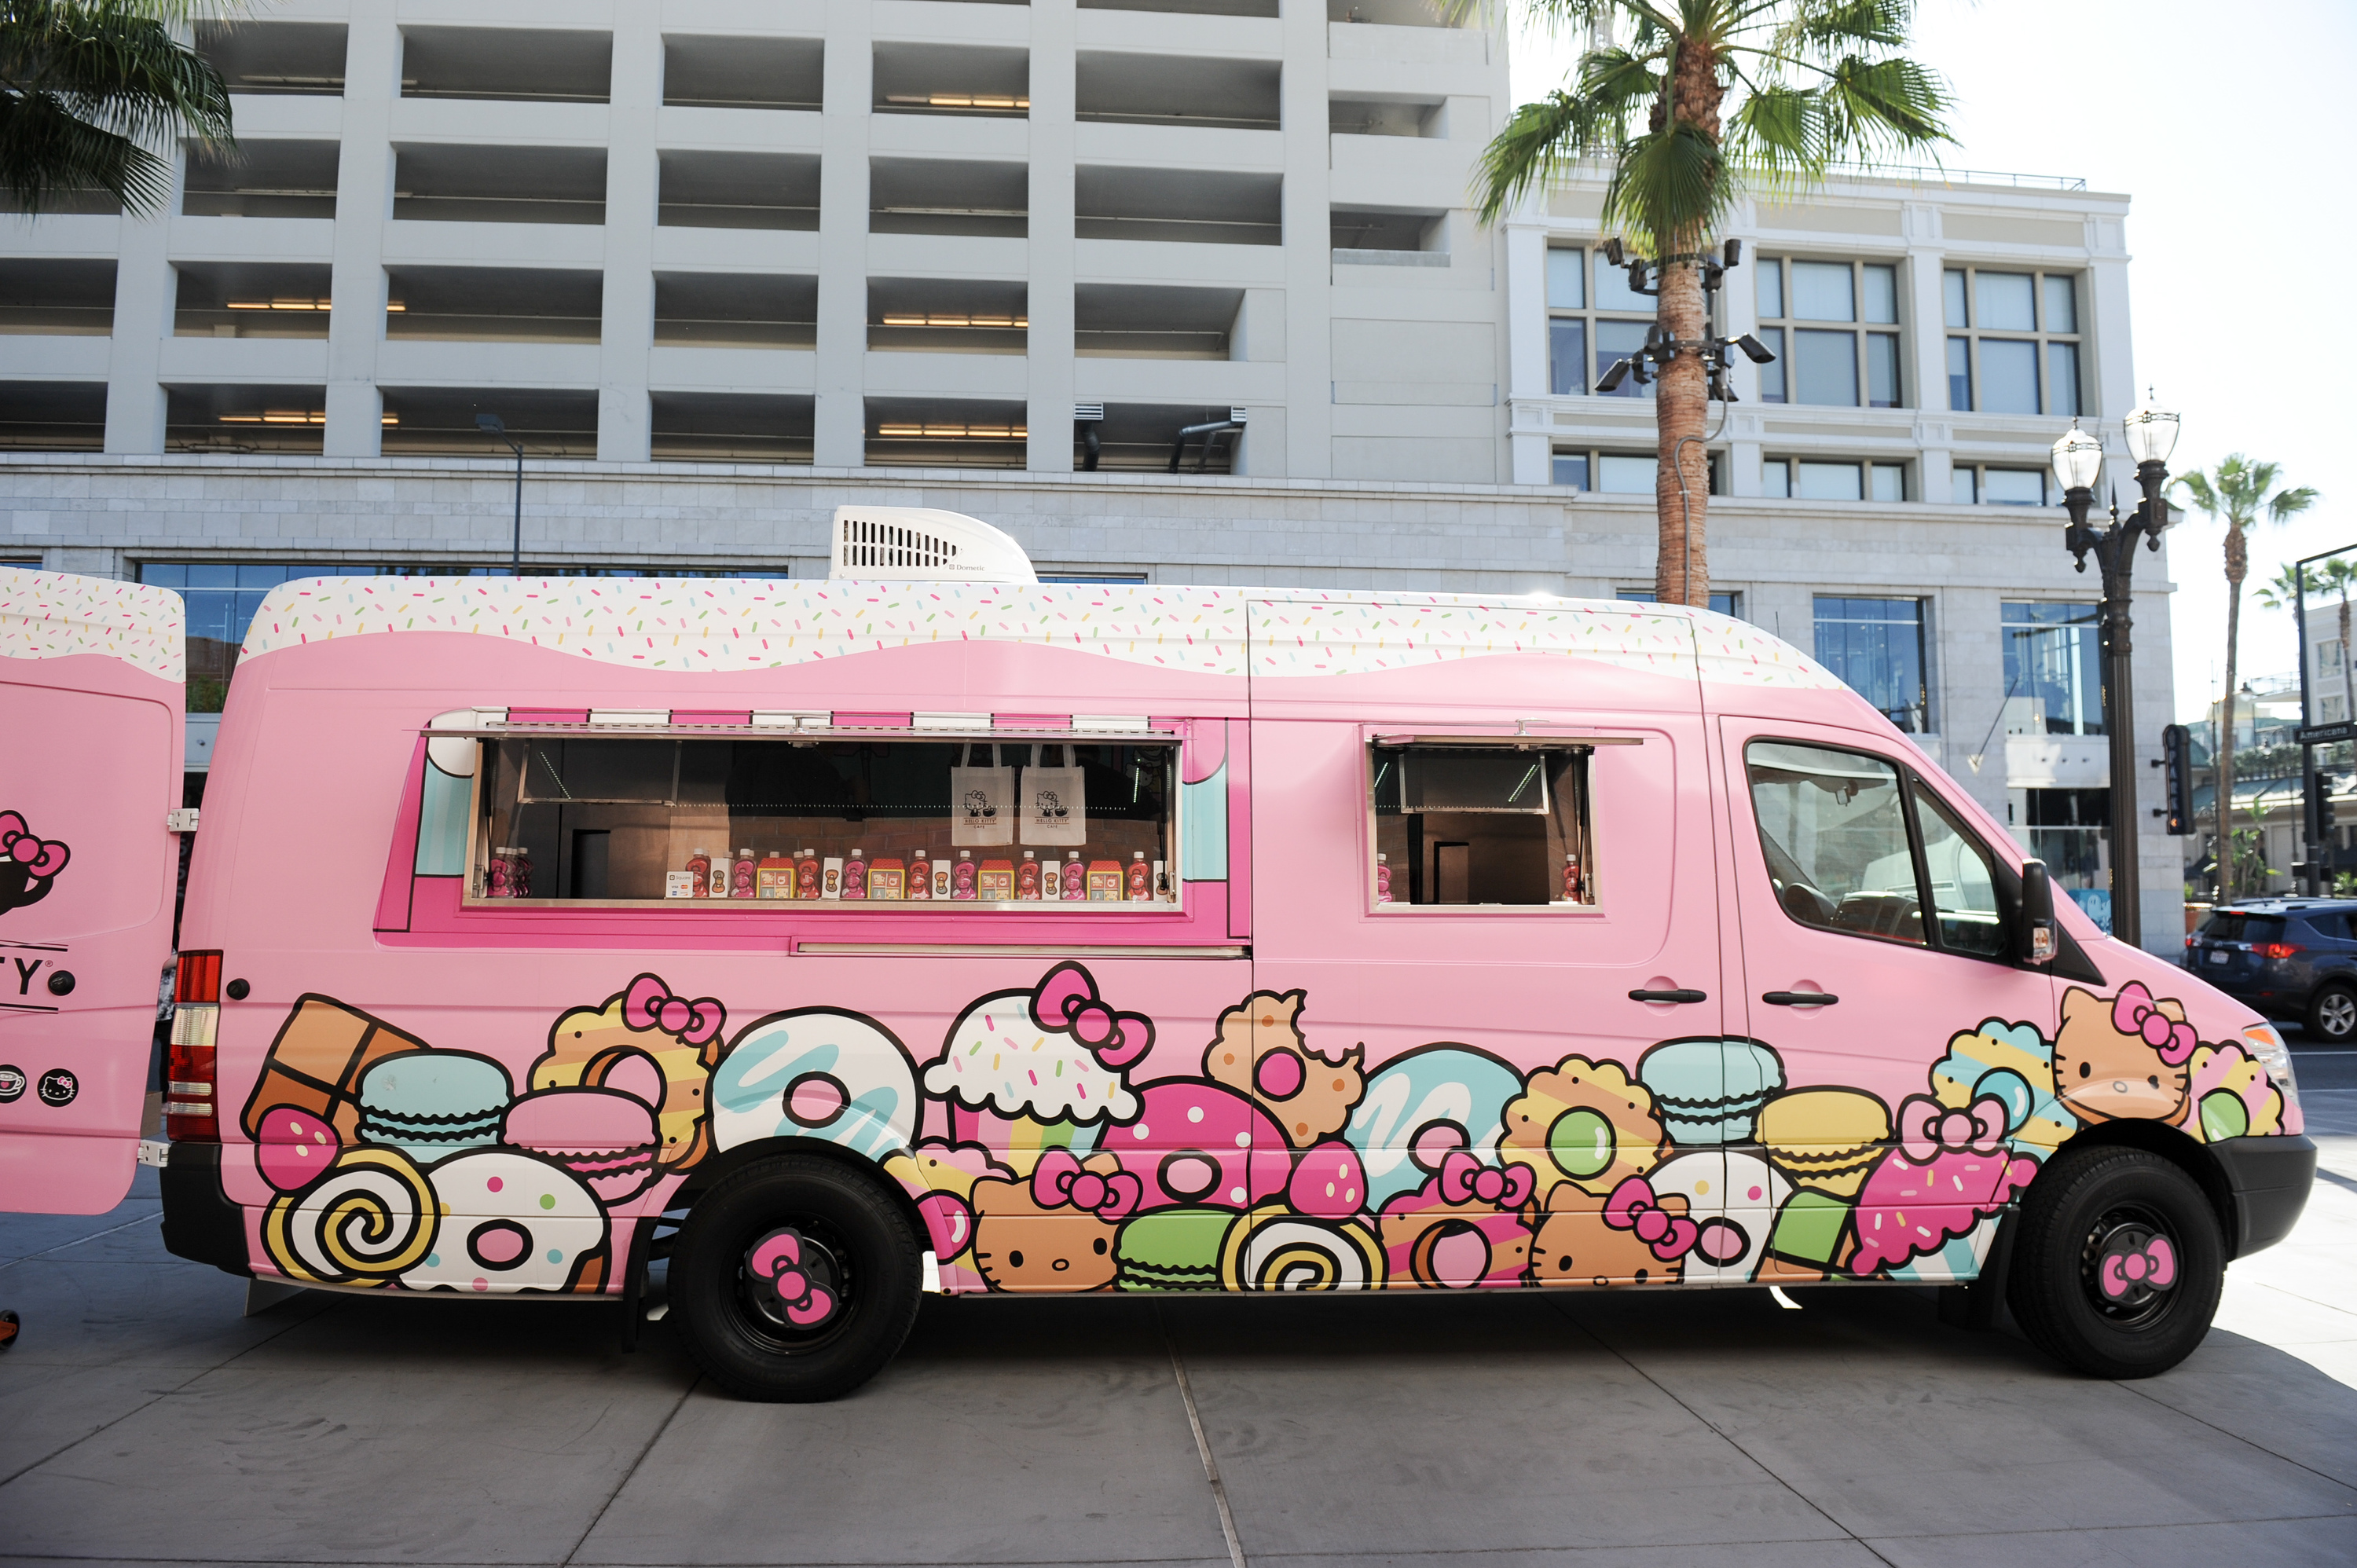 Hello Kitty Cafe Truck comes to town